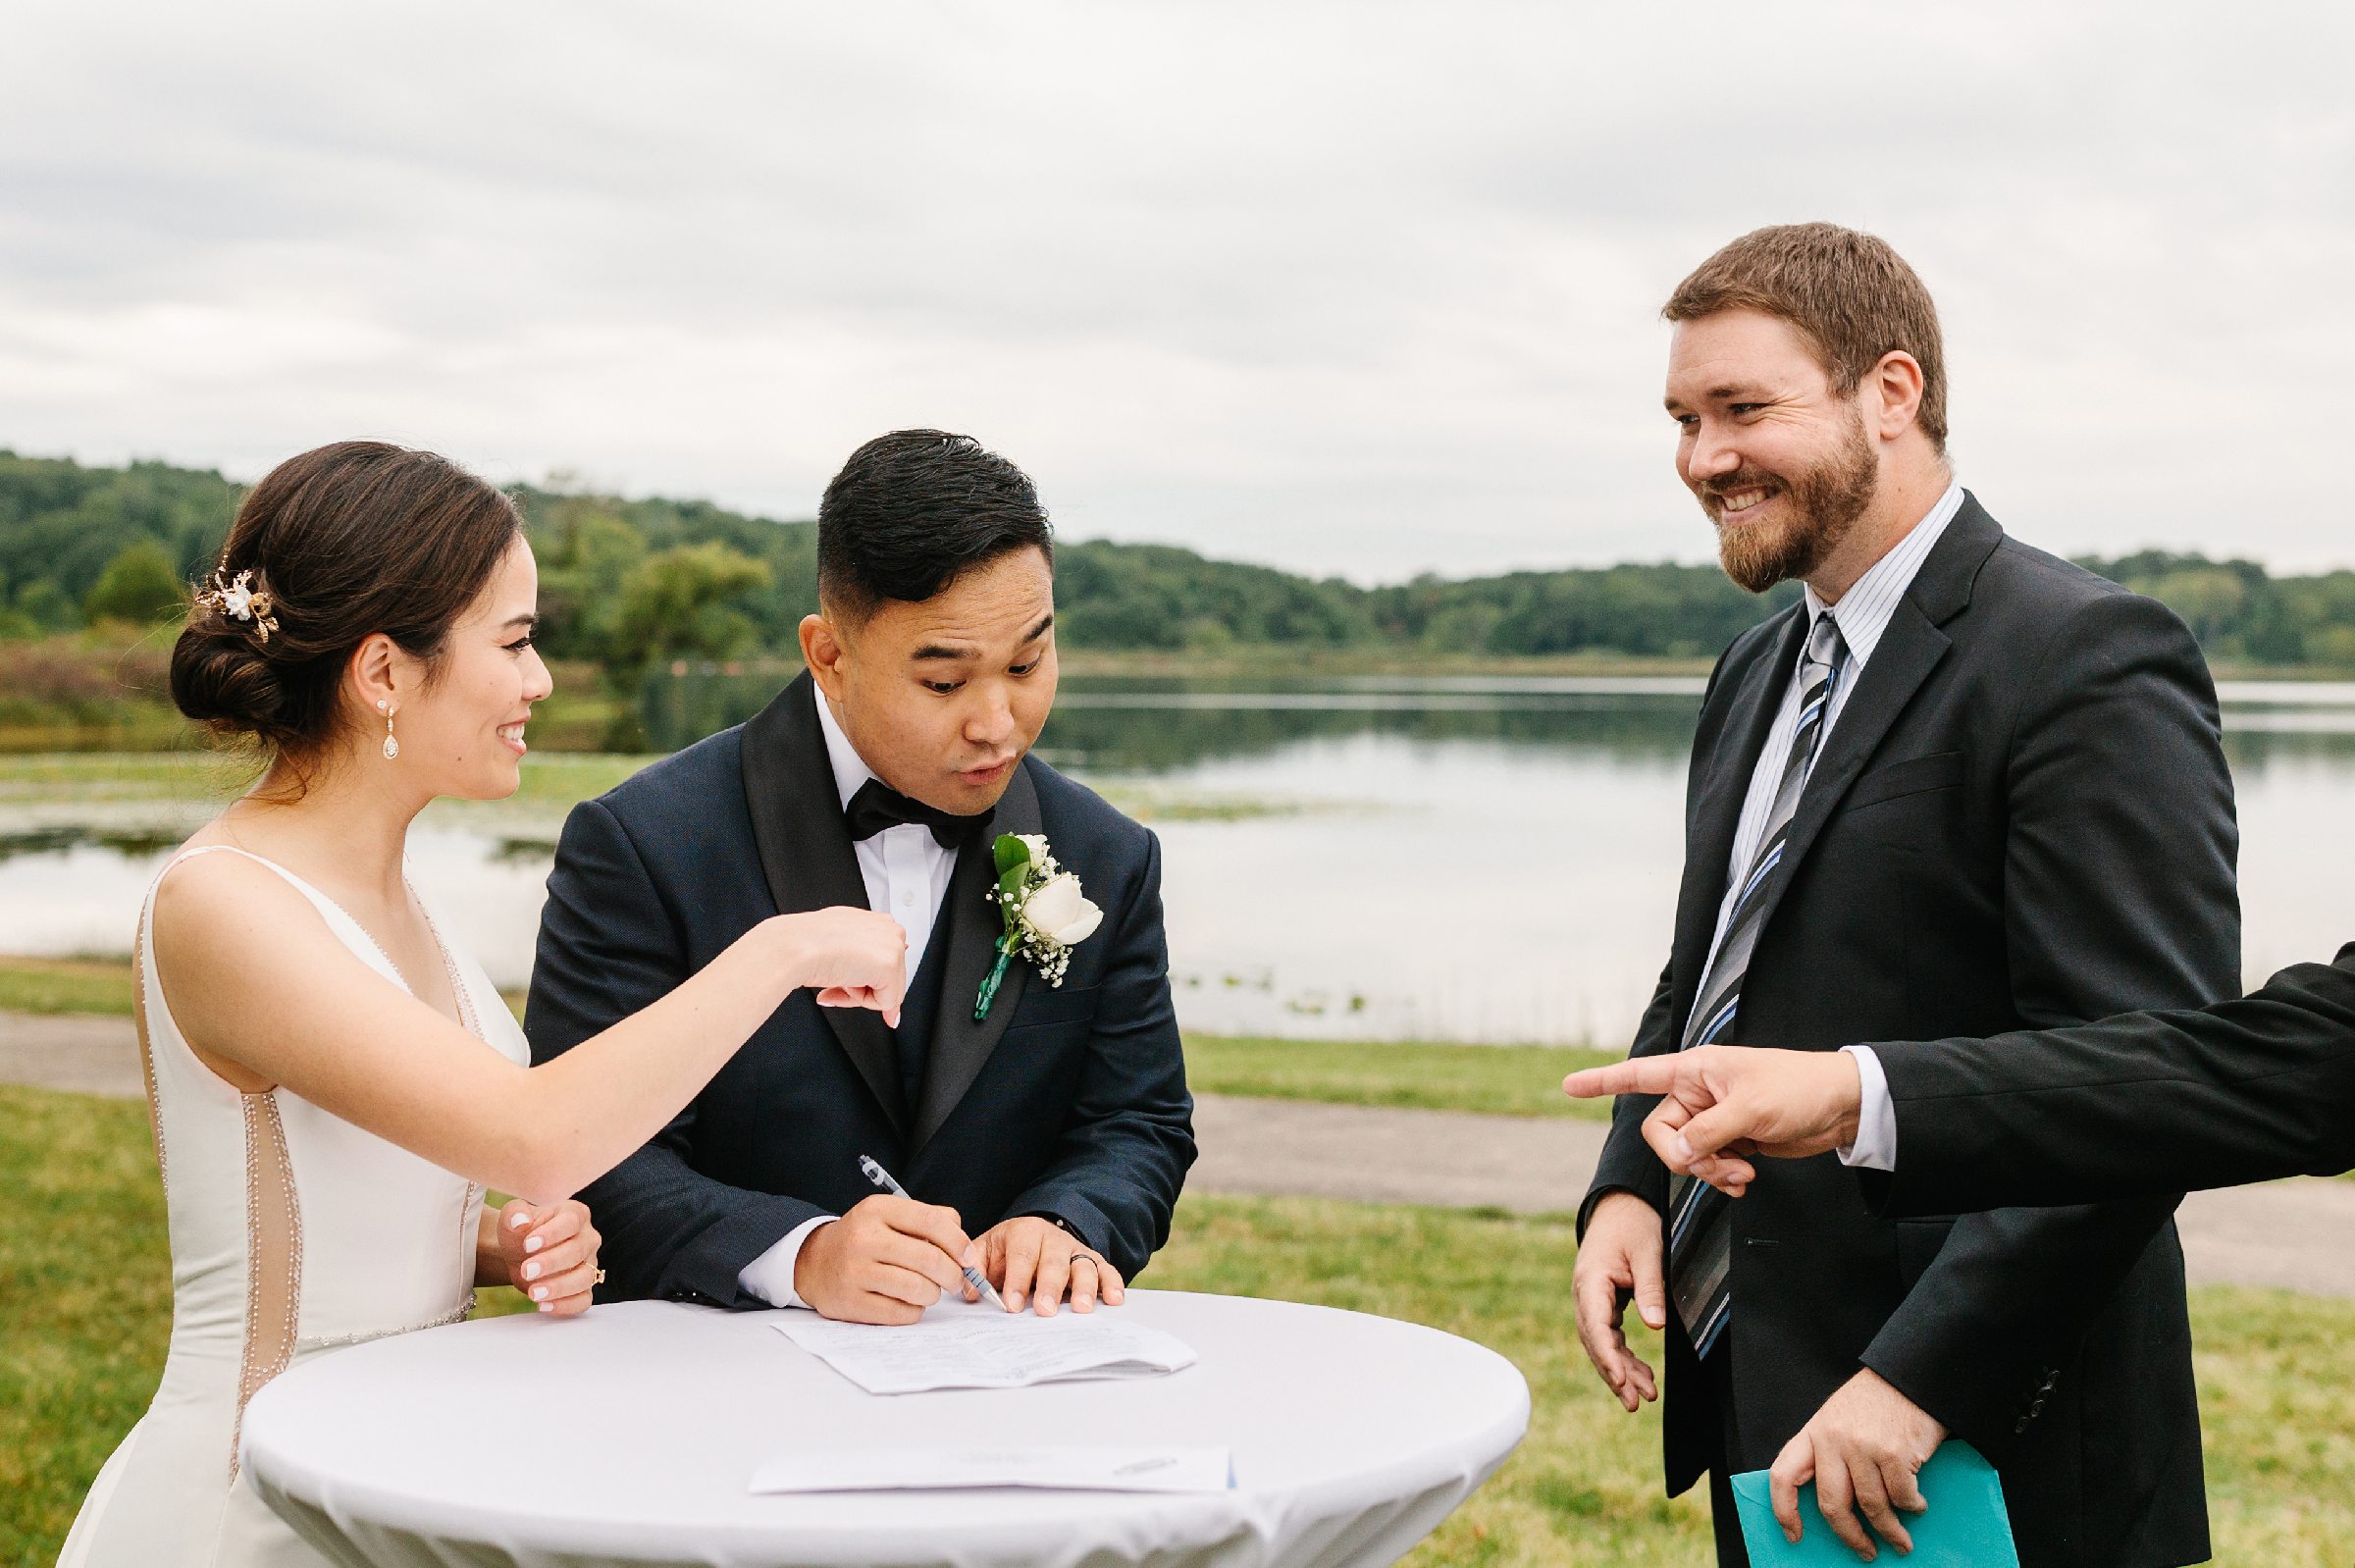 Pastor and groom are talking while they sign marriage certificate, bride is smiling by Detroit Wedding Photographer Michele Maloney